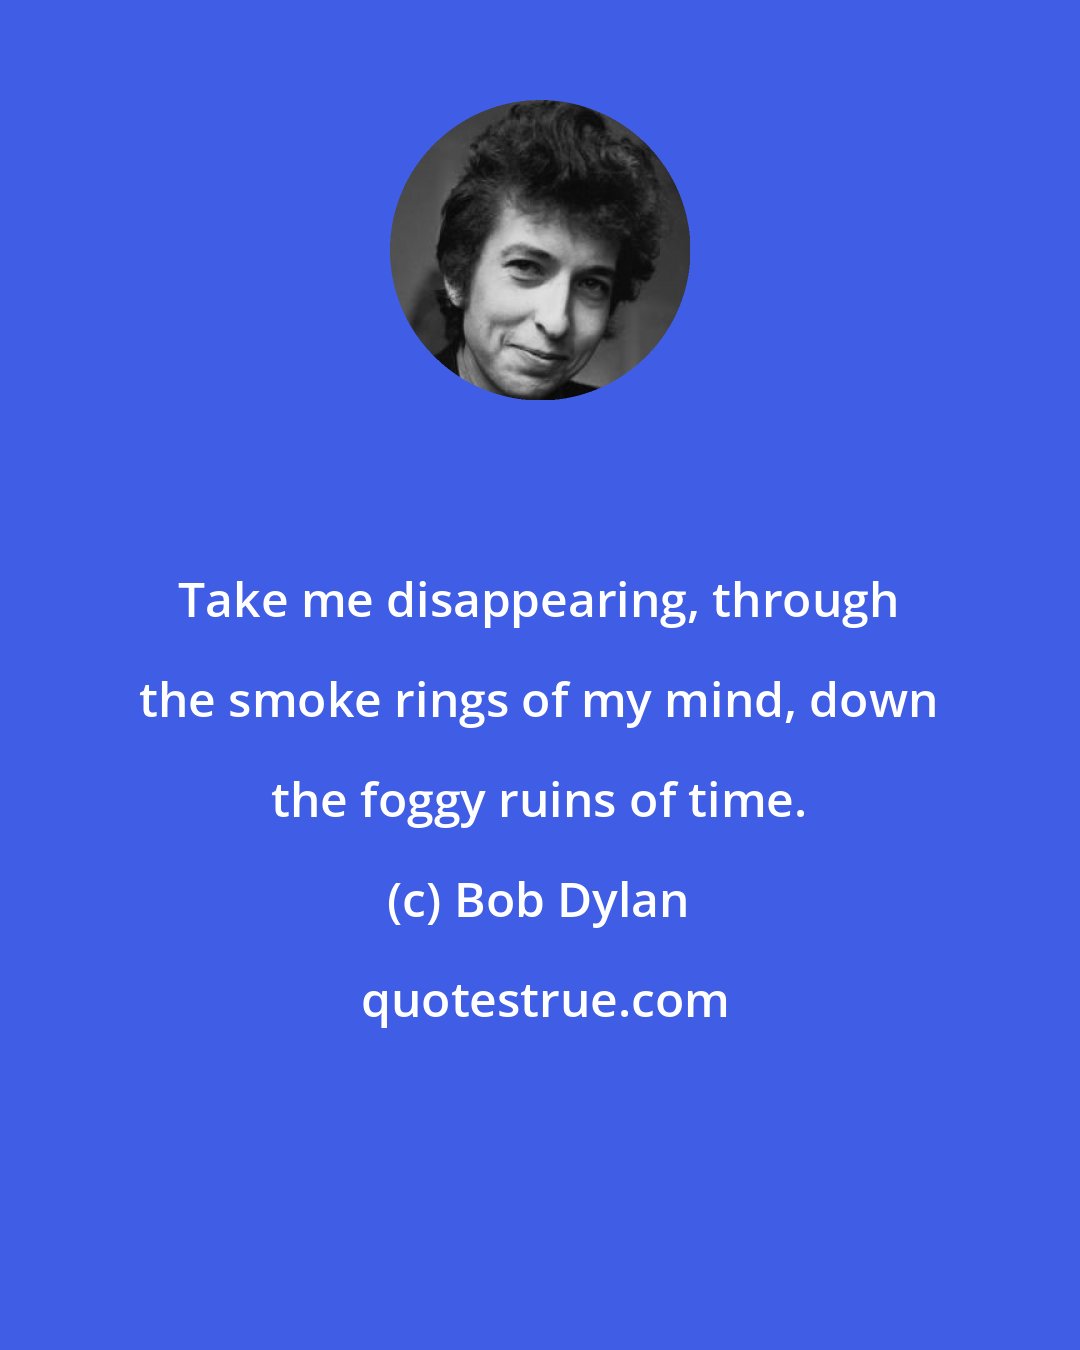 Bob Dylan: Take me disappearing, through the smoke rings of my mind, down the foggy ruins of time.